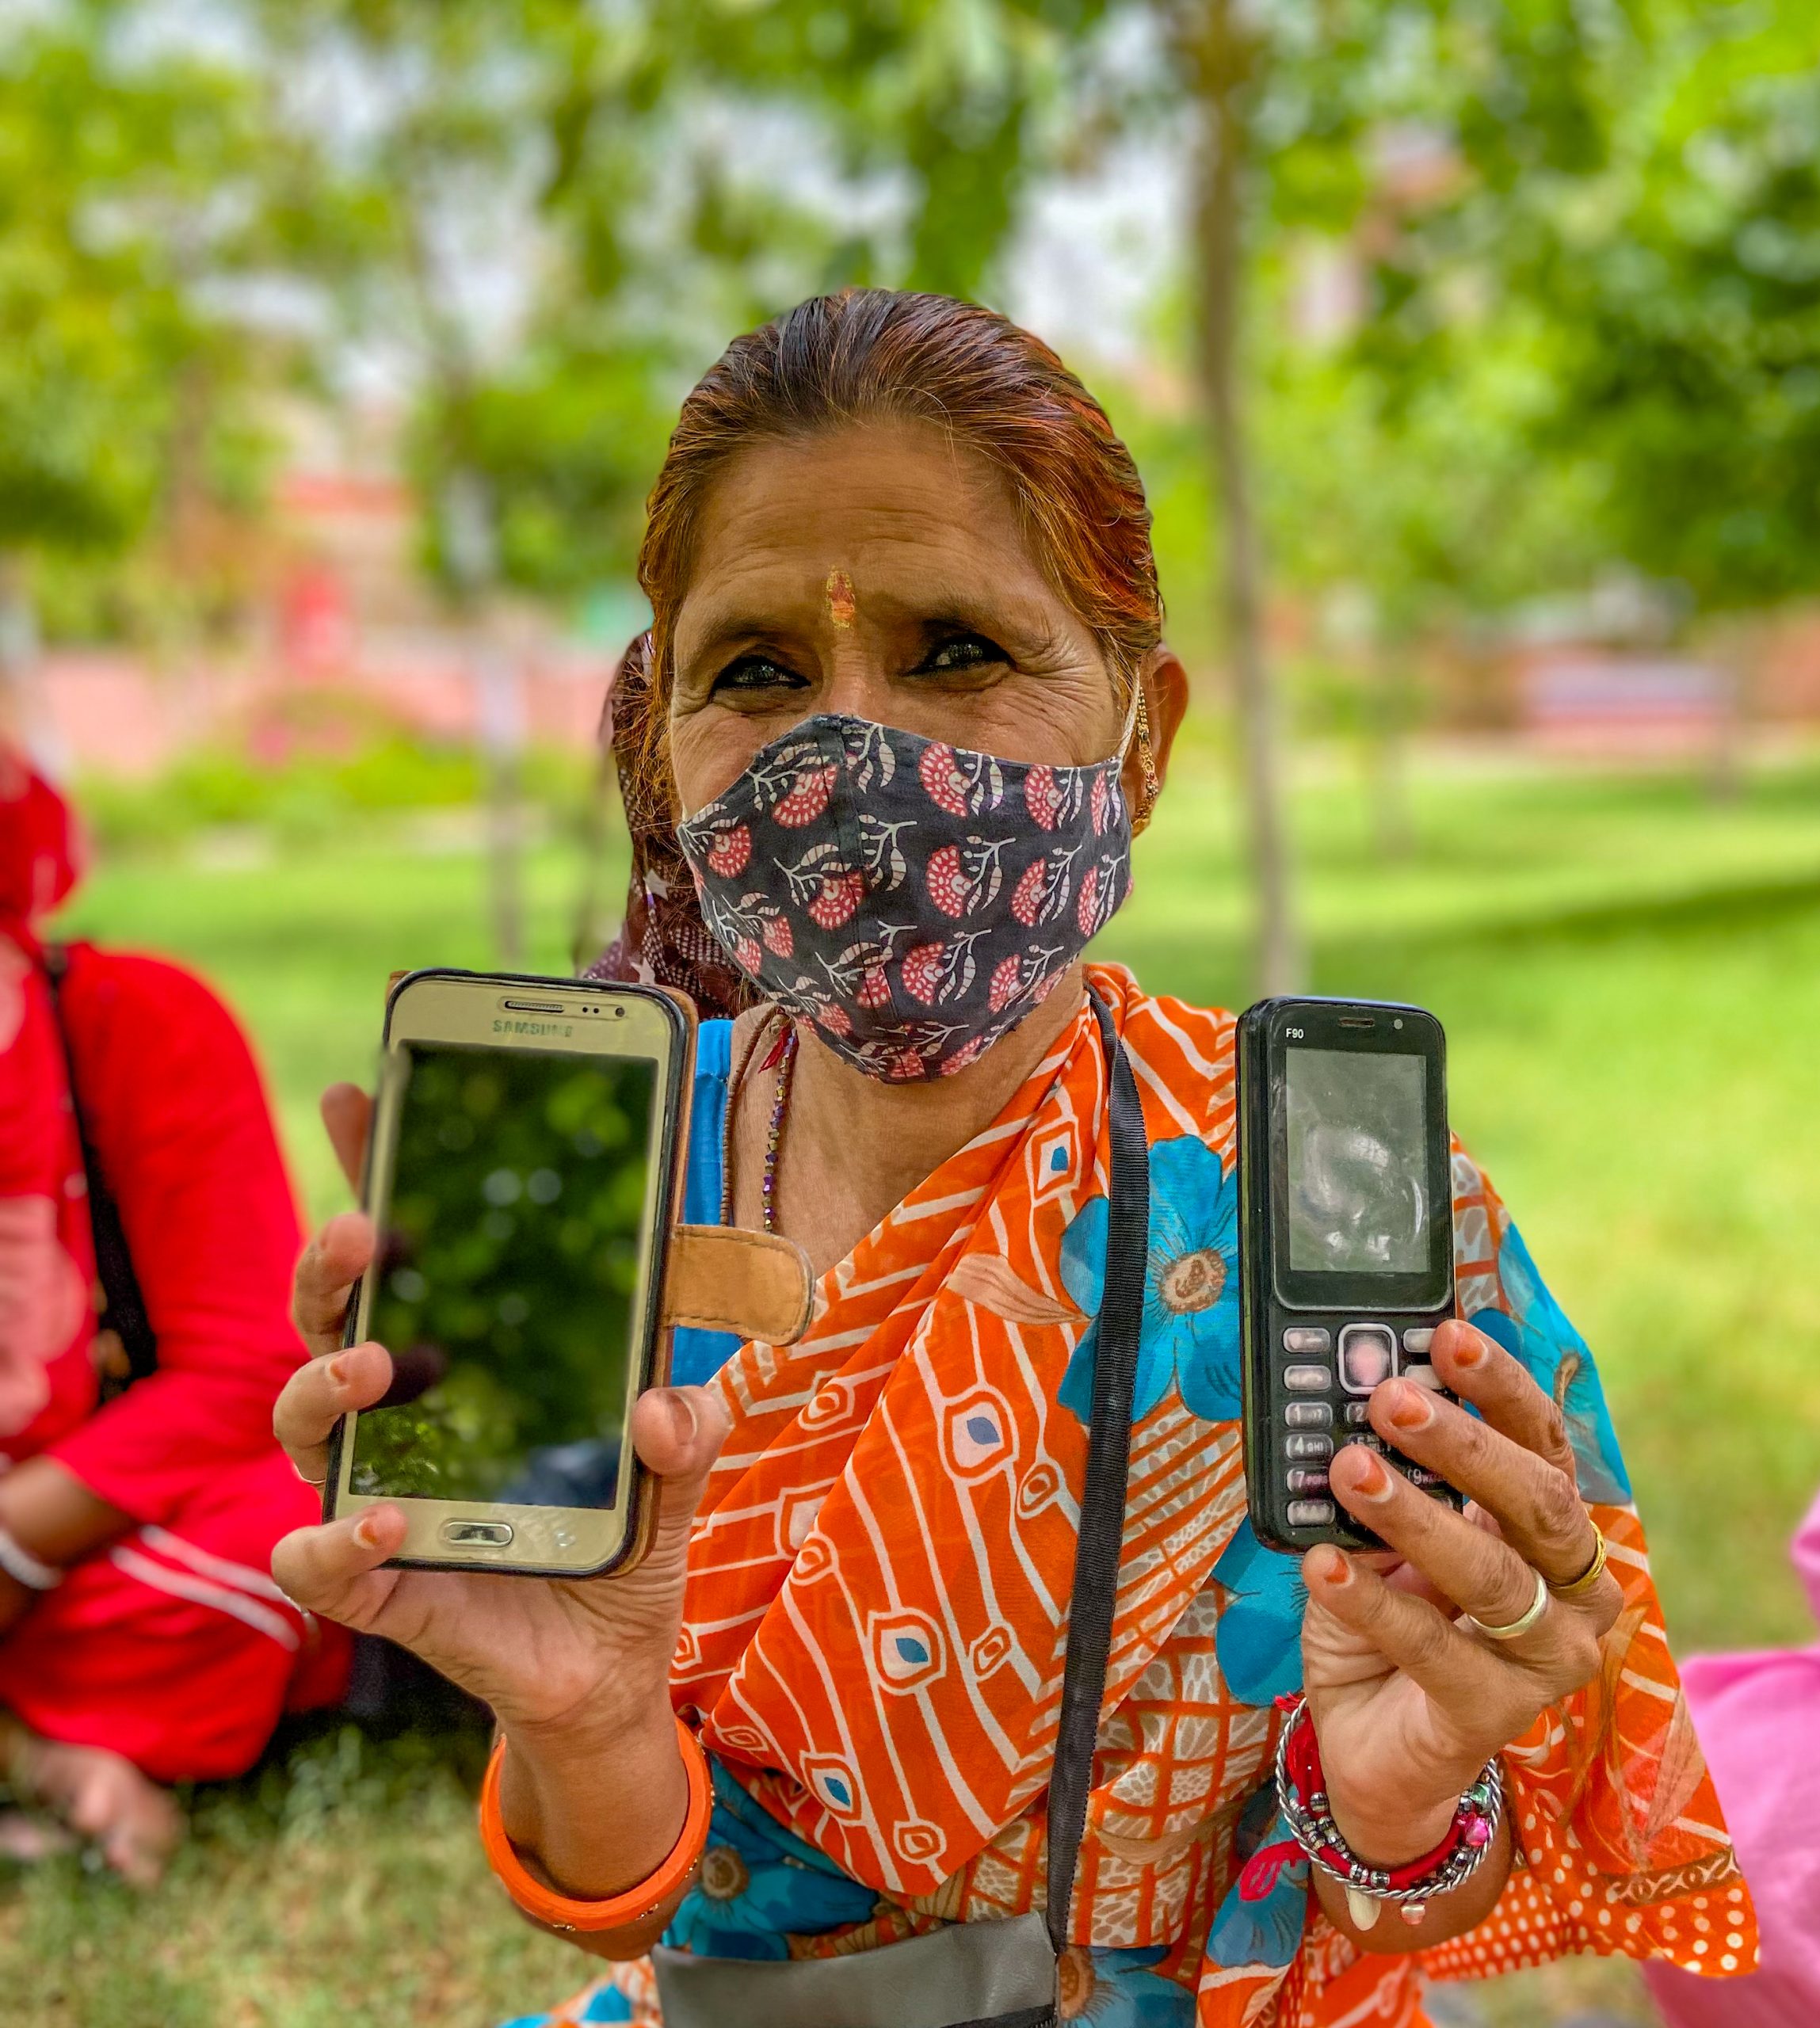 A woman shows her regular feature phone and smartphone